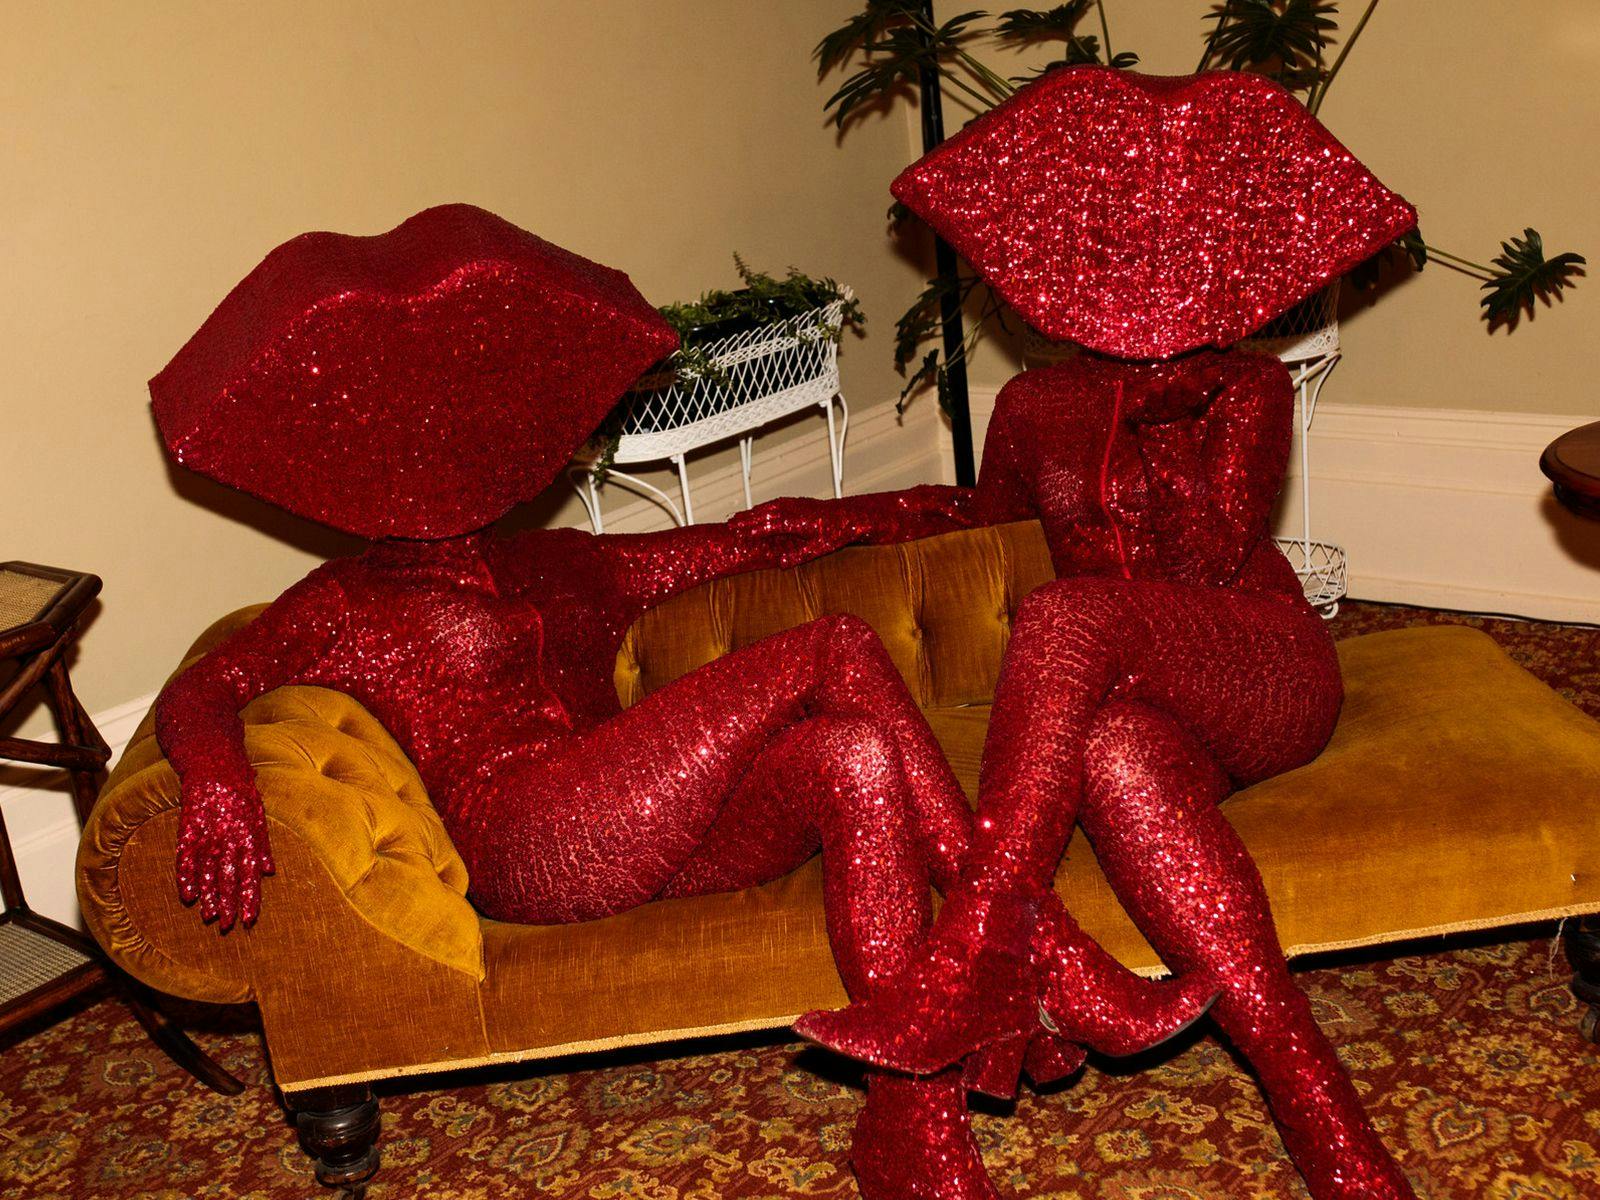 The Huxleys wearing sparkling red outfits sitting on a brown couch.